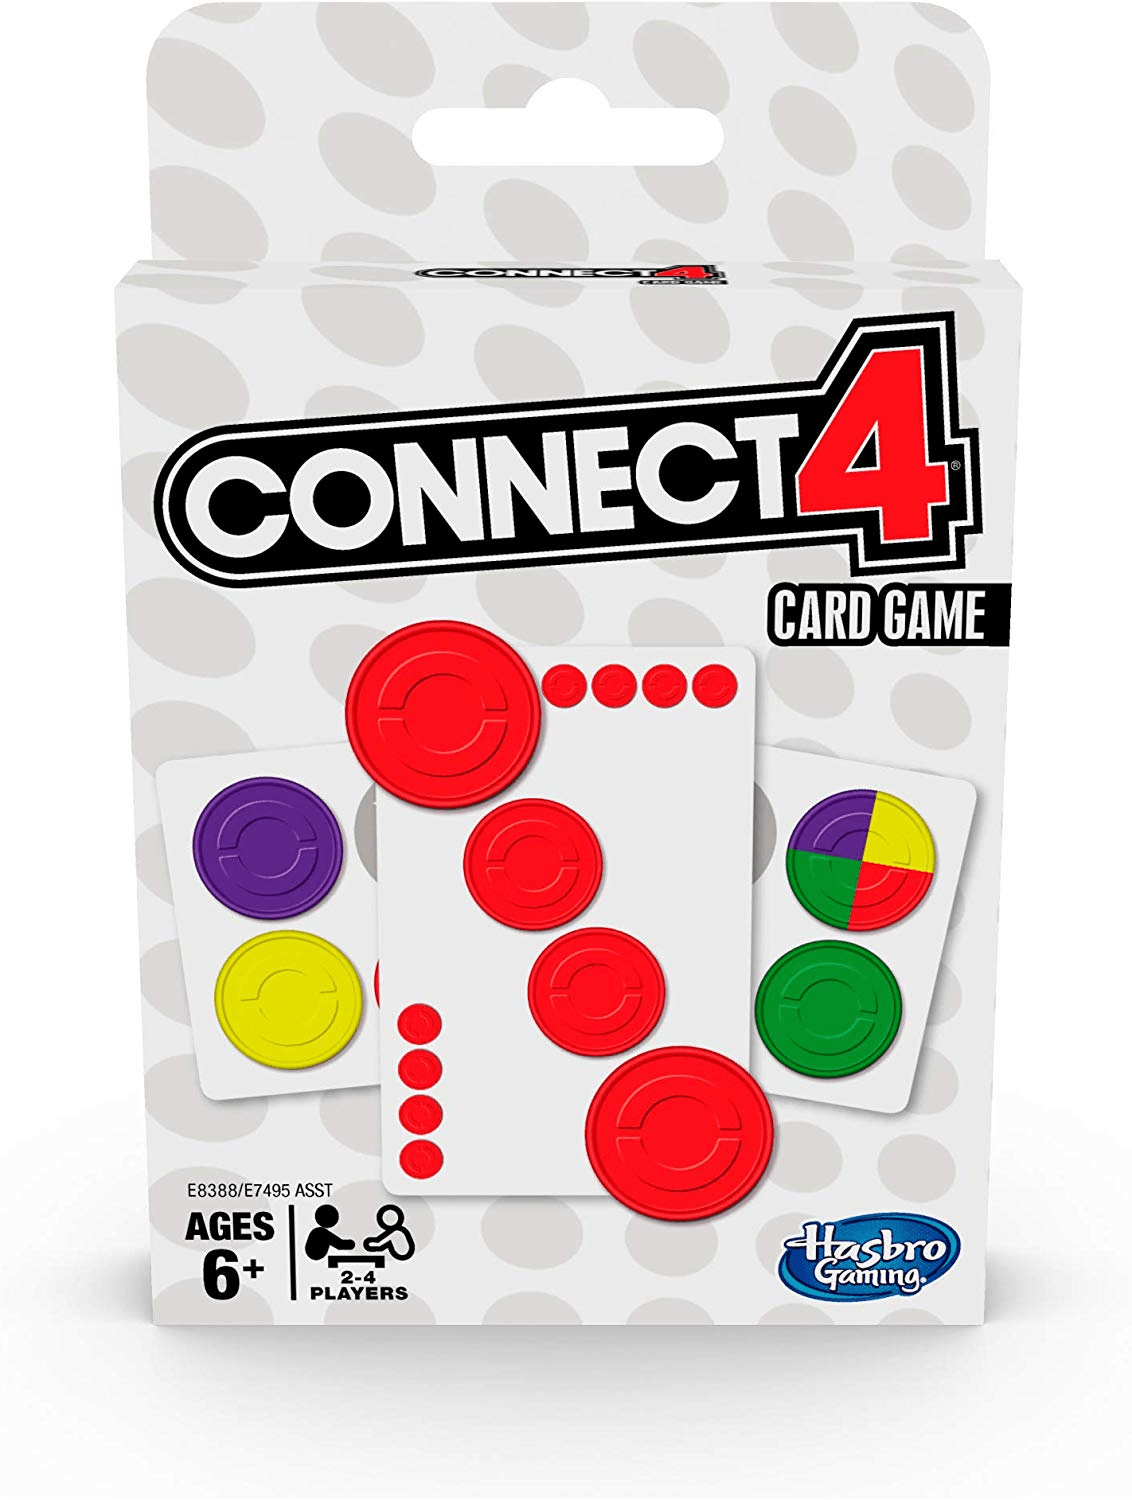 Connect 4 - Card Game by Hasbro - Waterfront News